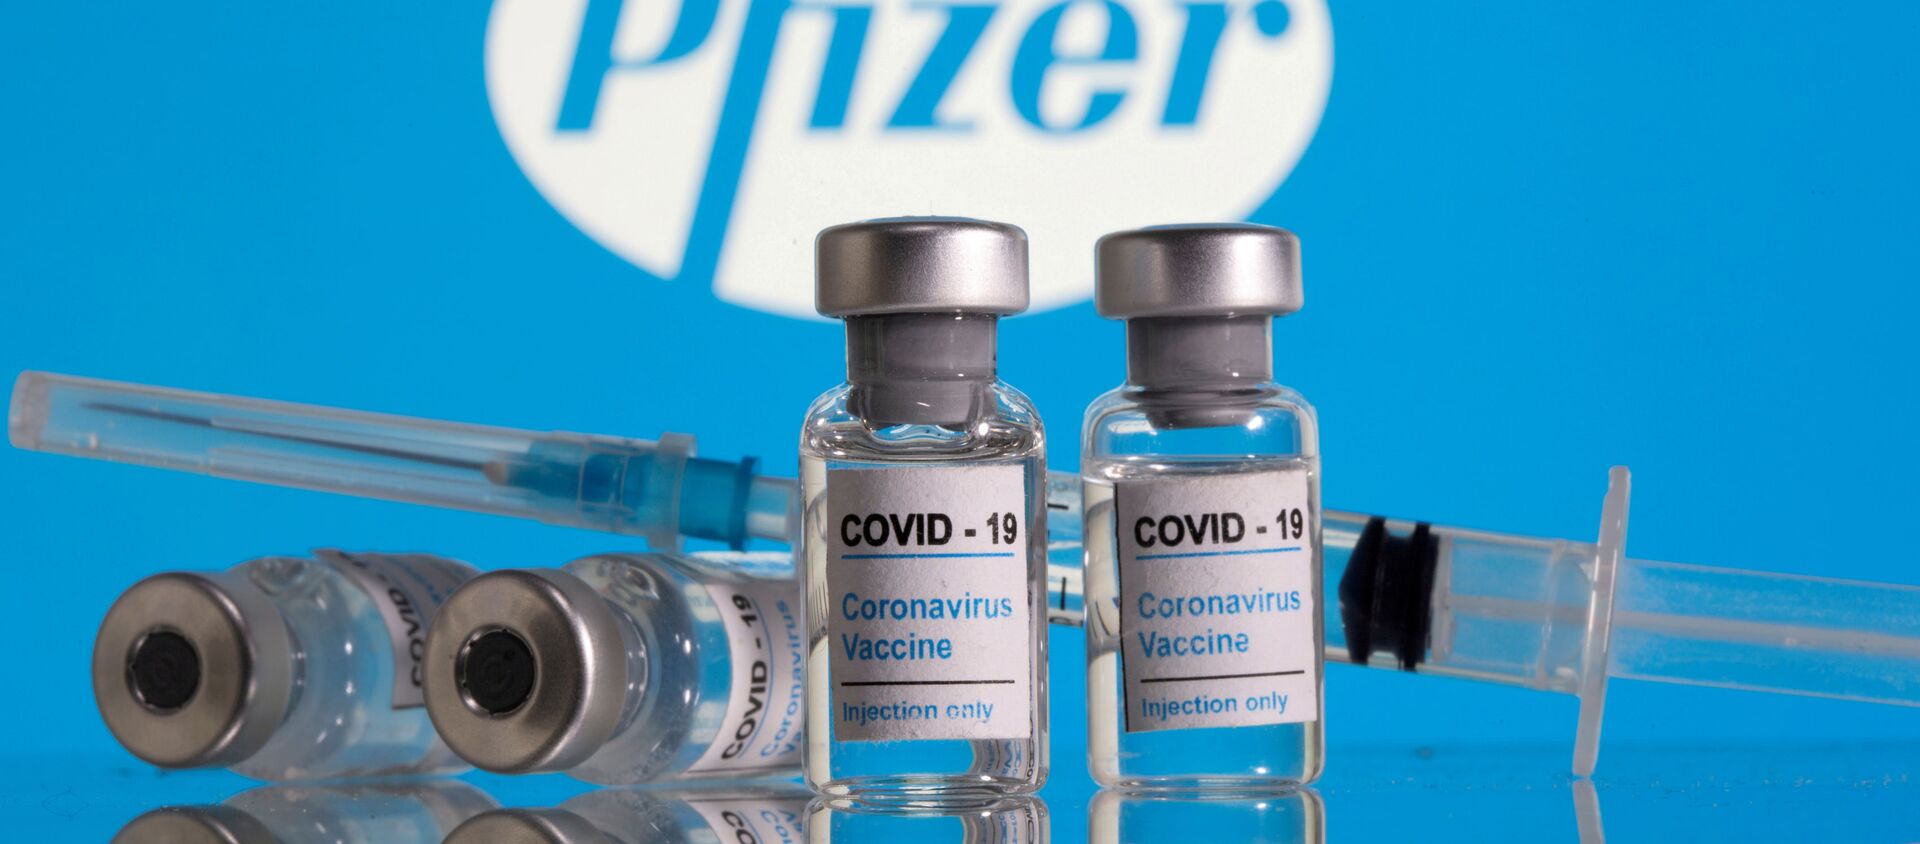 Vials labelled COVID-19 Coronavirus Vaccine and a syringe are seen in front of the Pfizer logo in this illustration taken February 9, 2021 - Sputnik International, 1920, 07.05.2021